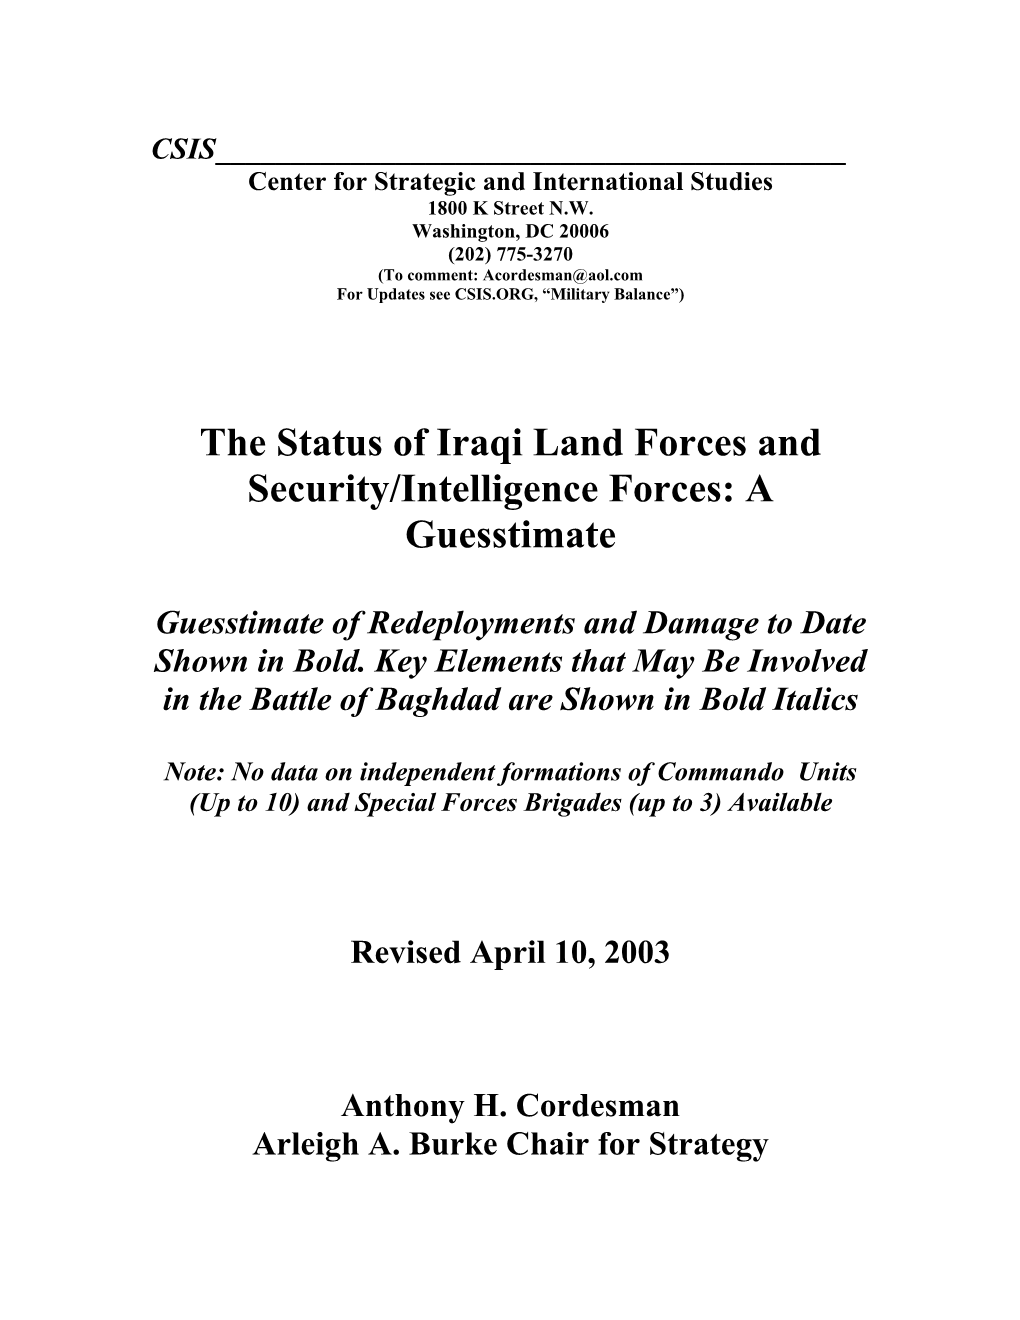 The Status of Iraqi Land Forces and Security/Intelligence Forces: a Guesstimate